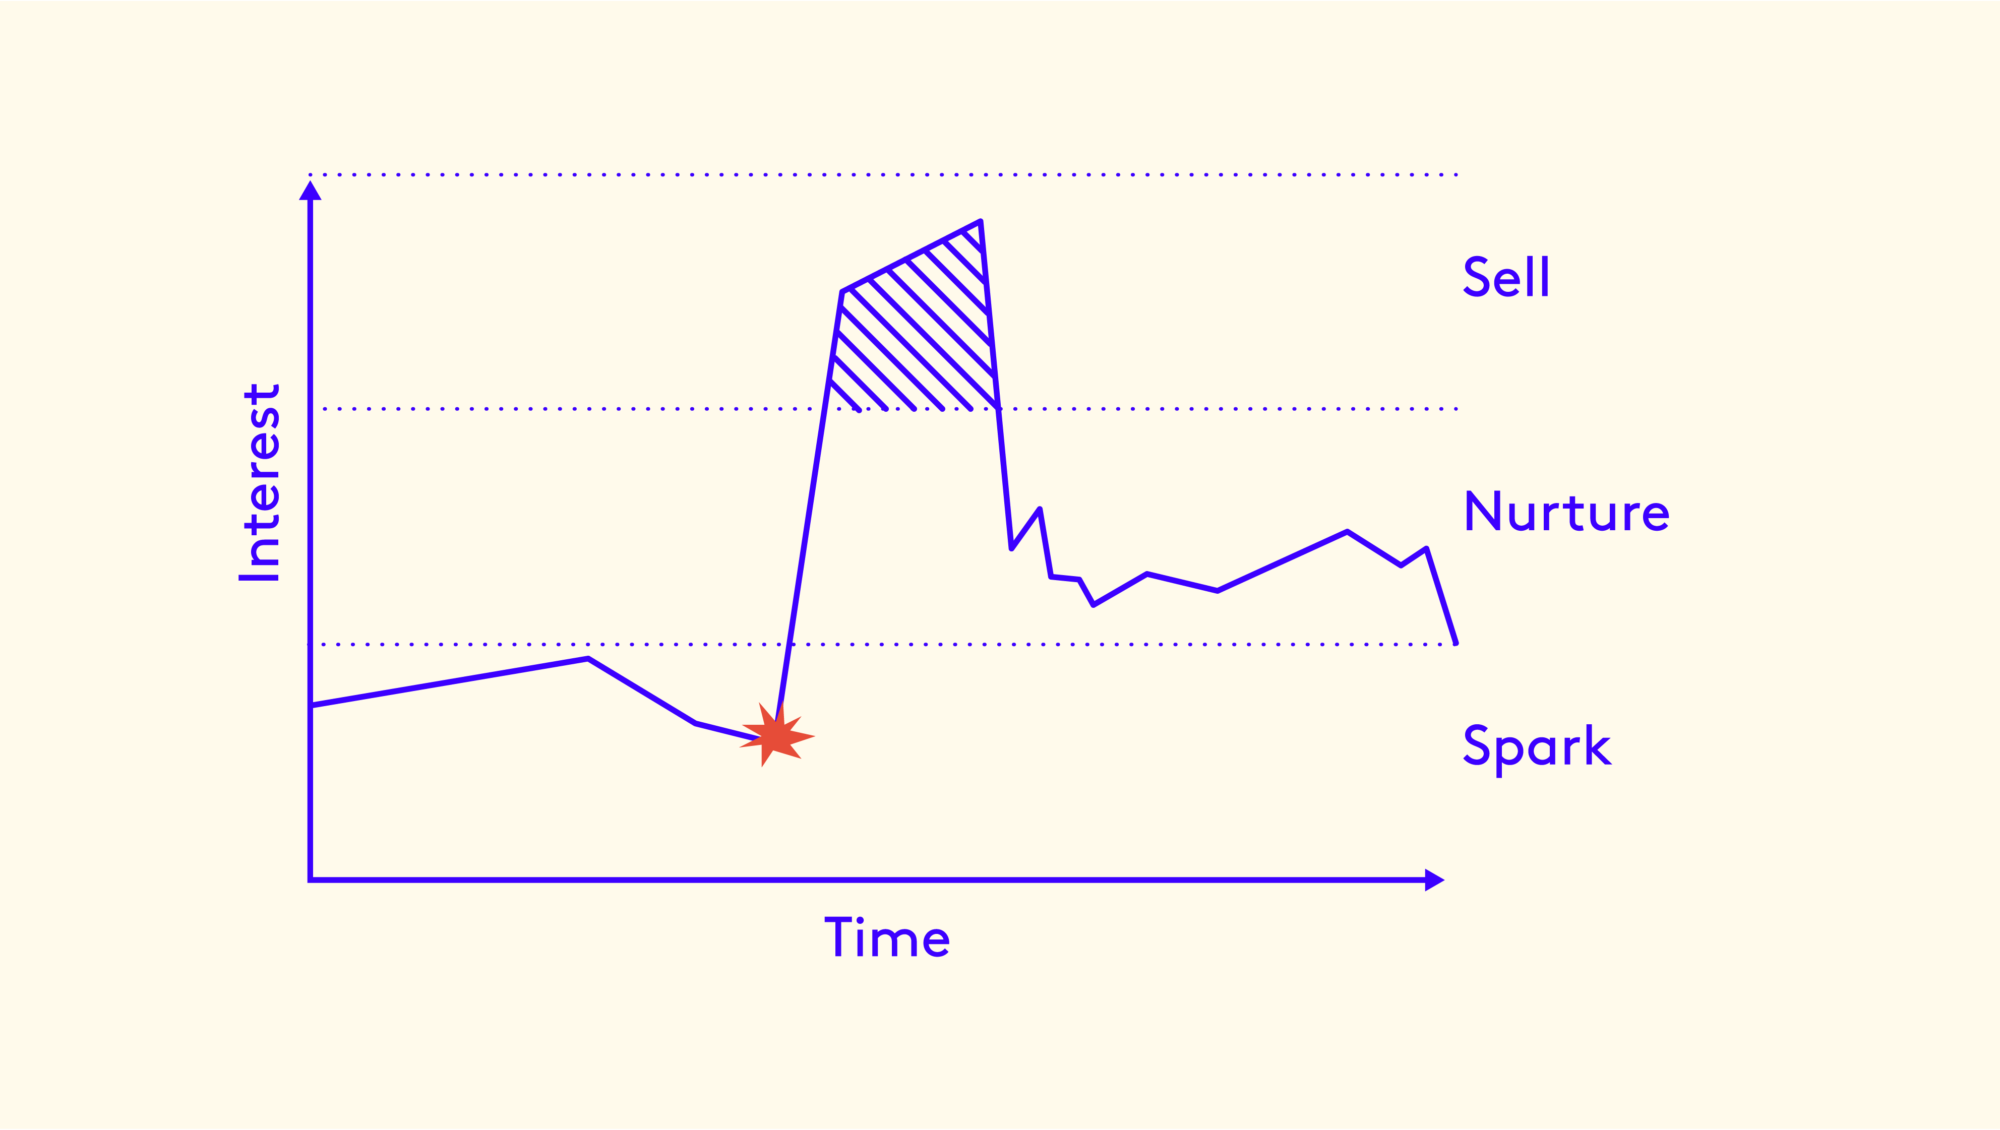 Image of graph - x axis is time, y axis is interest - trend line up and down, up and down - through layers of "Spark, Nurture and Sell"